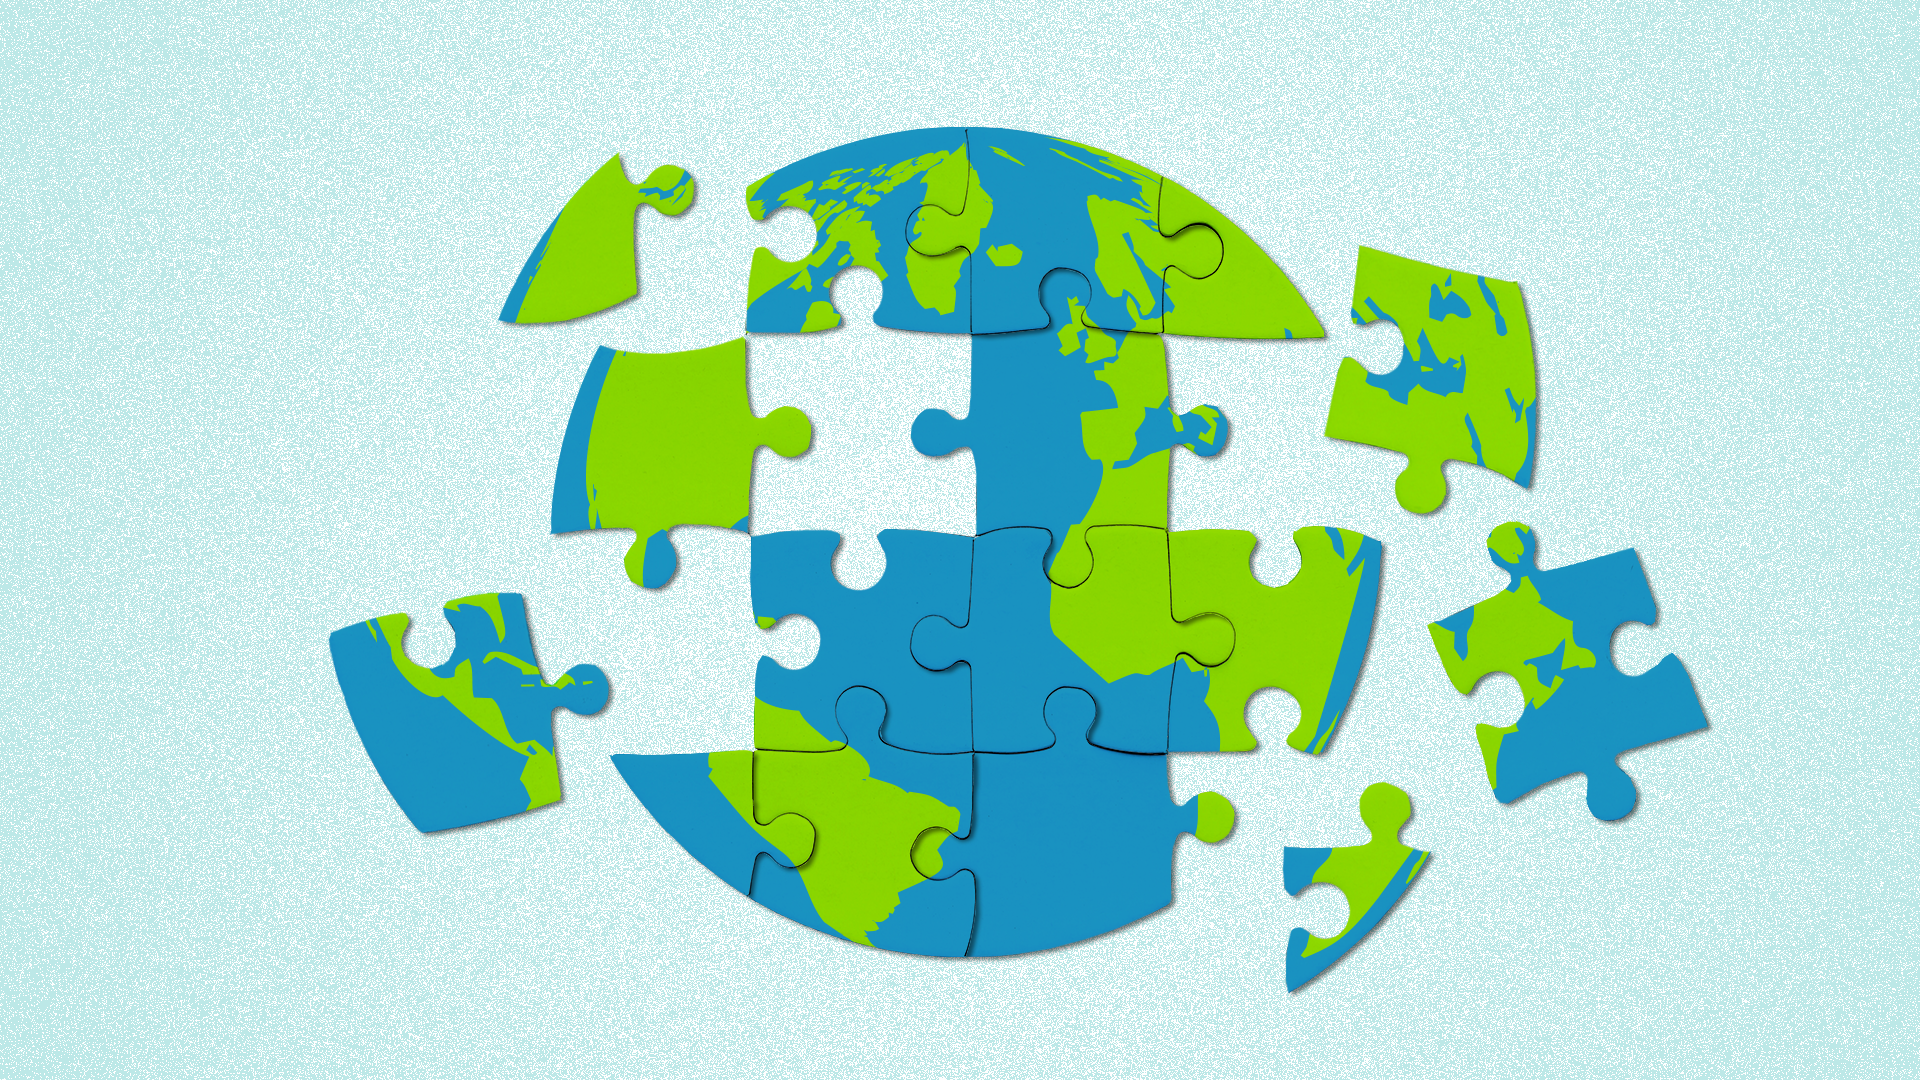 Illustration of the world as a puzzle with pieces partially put together.